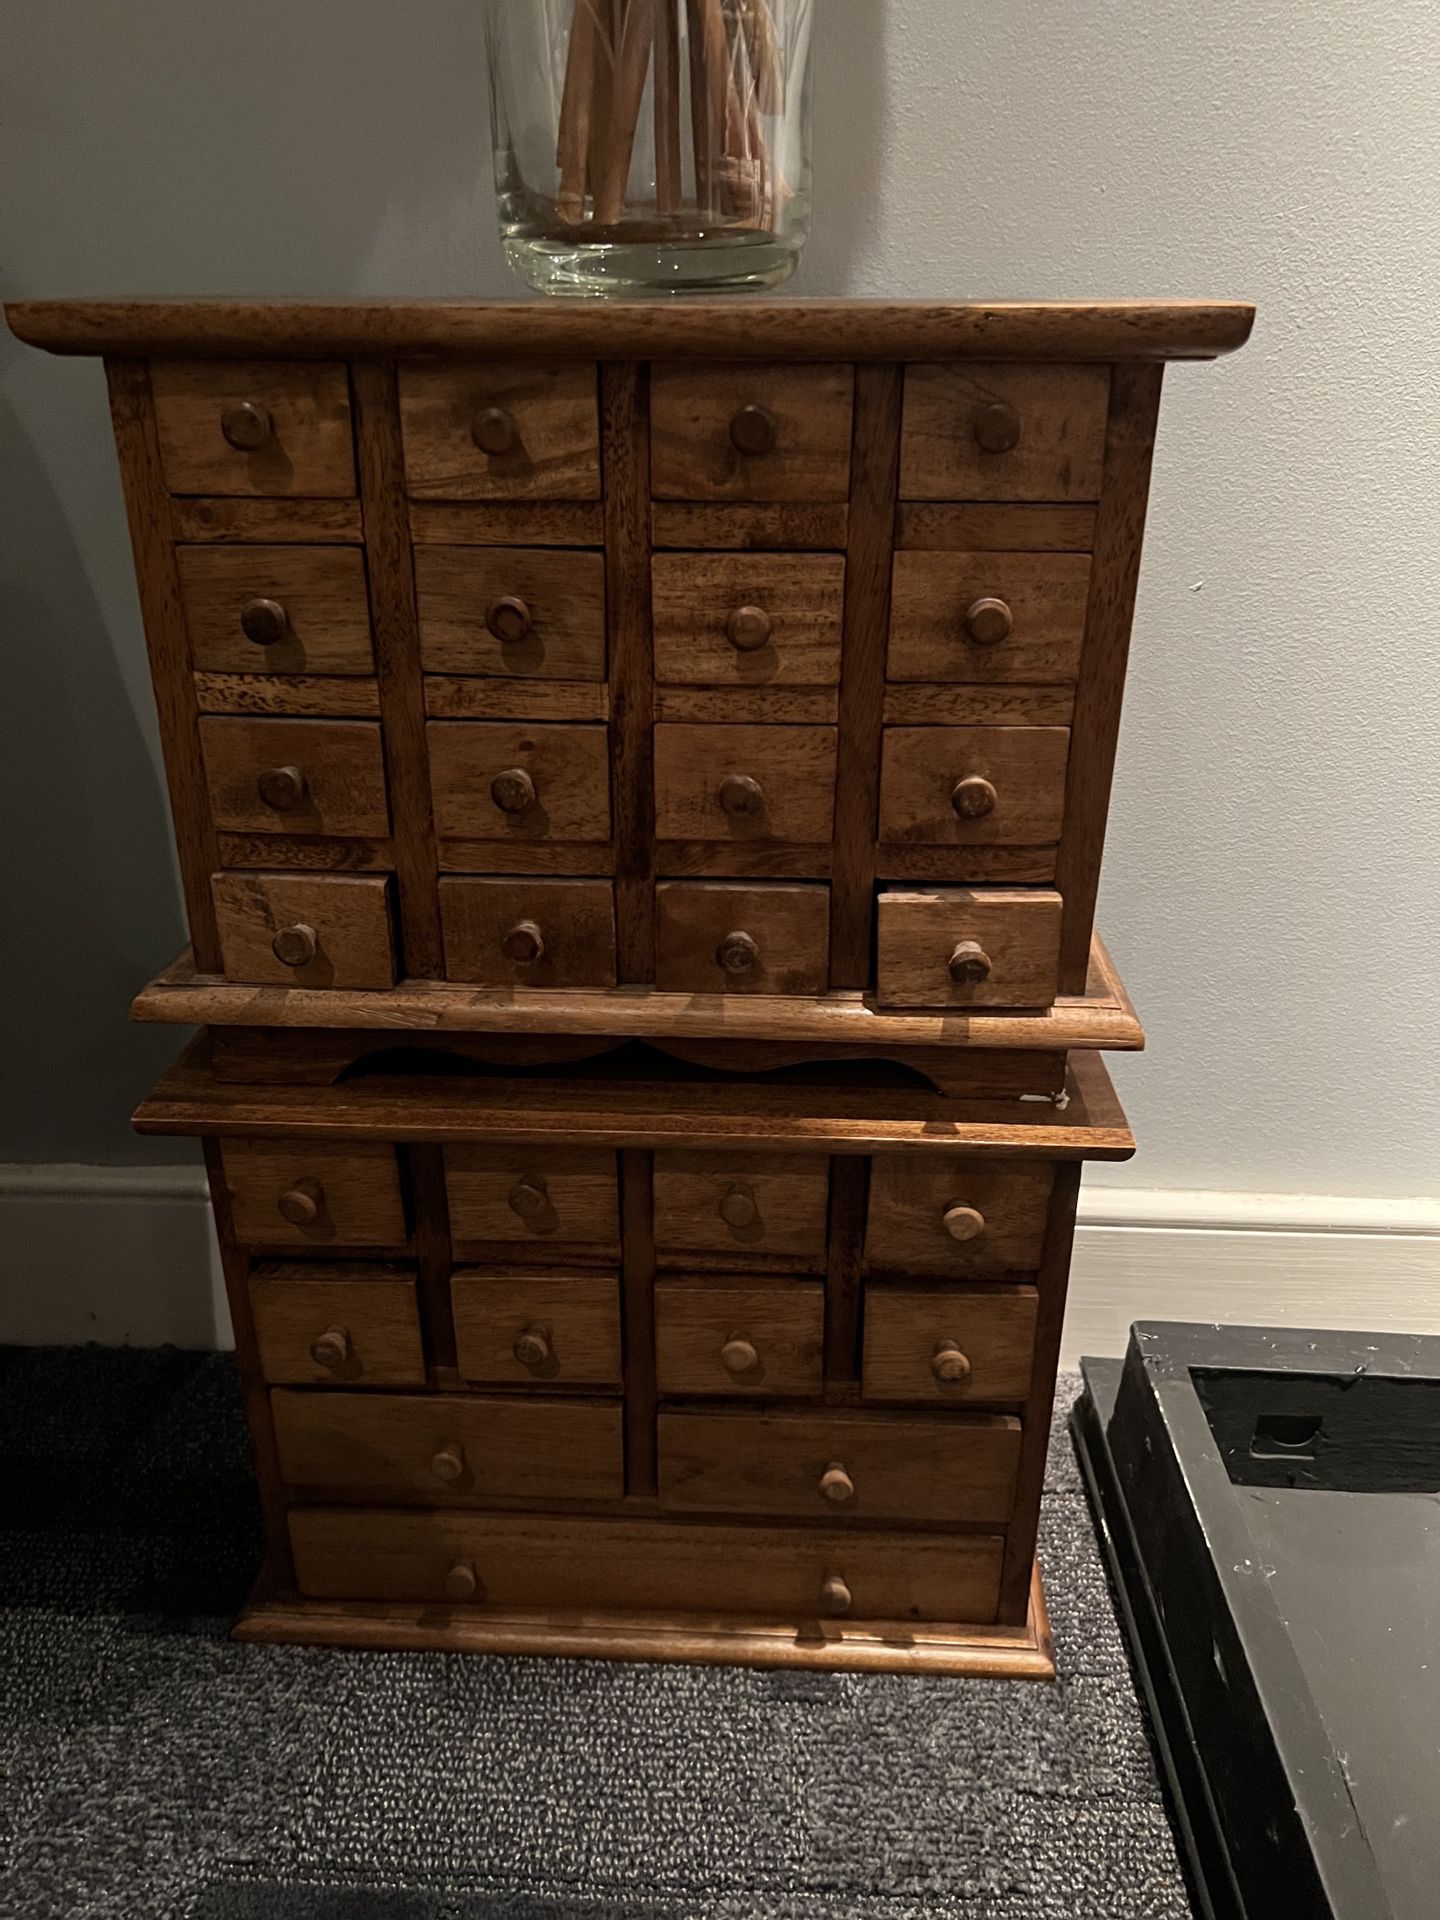 Small Wood Antique Drawers For Makeup Or Jewelery 